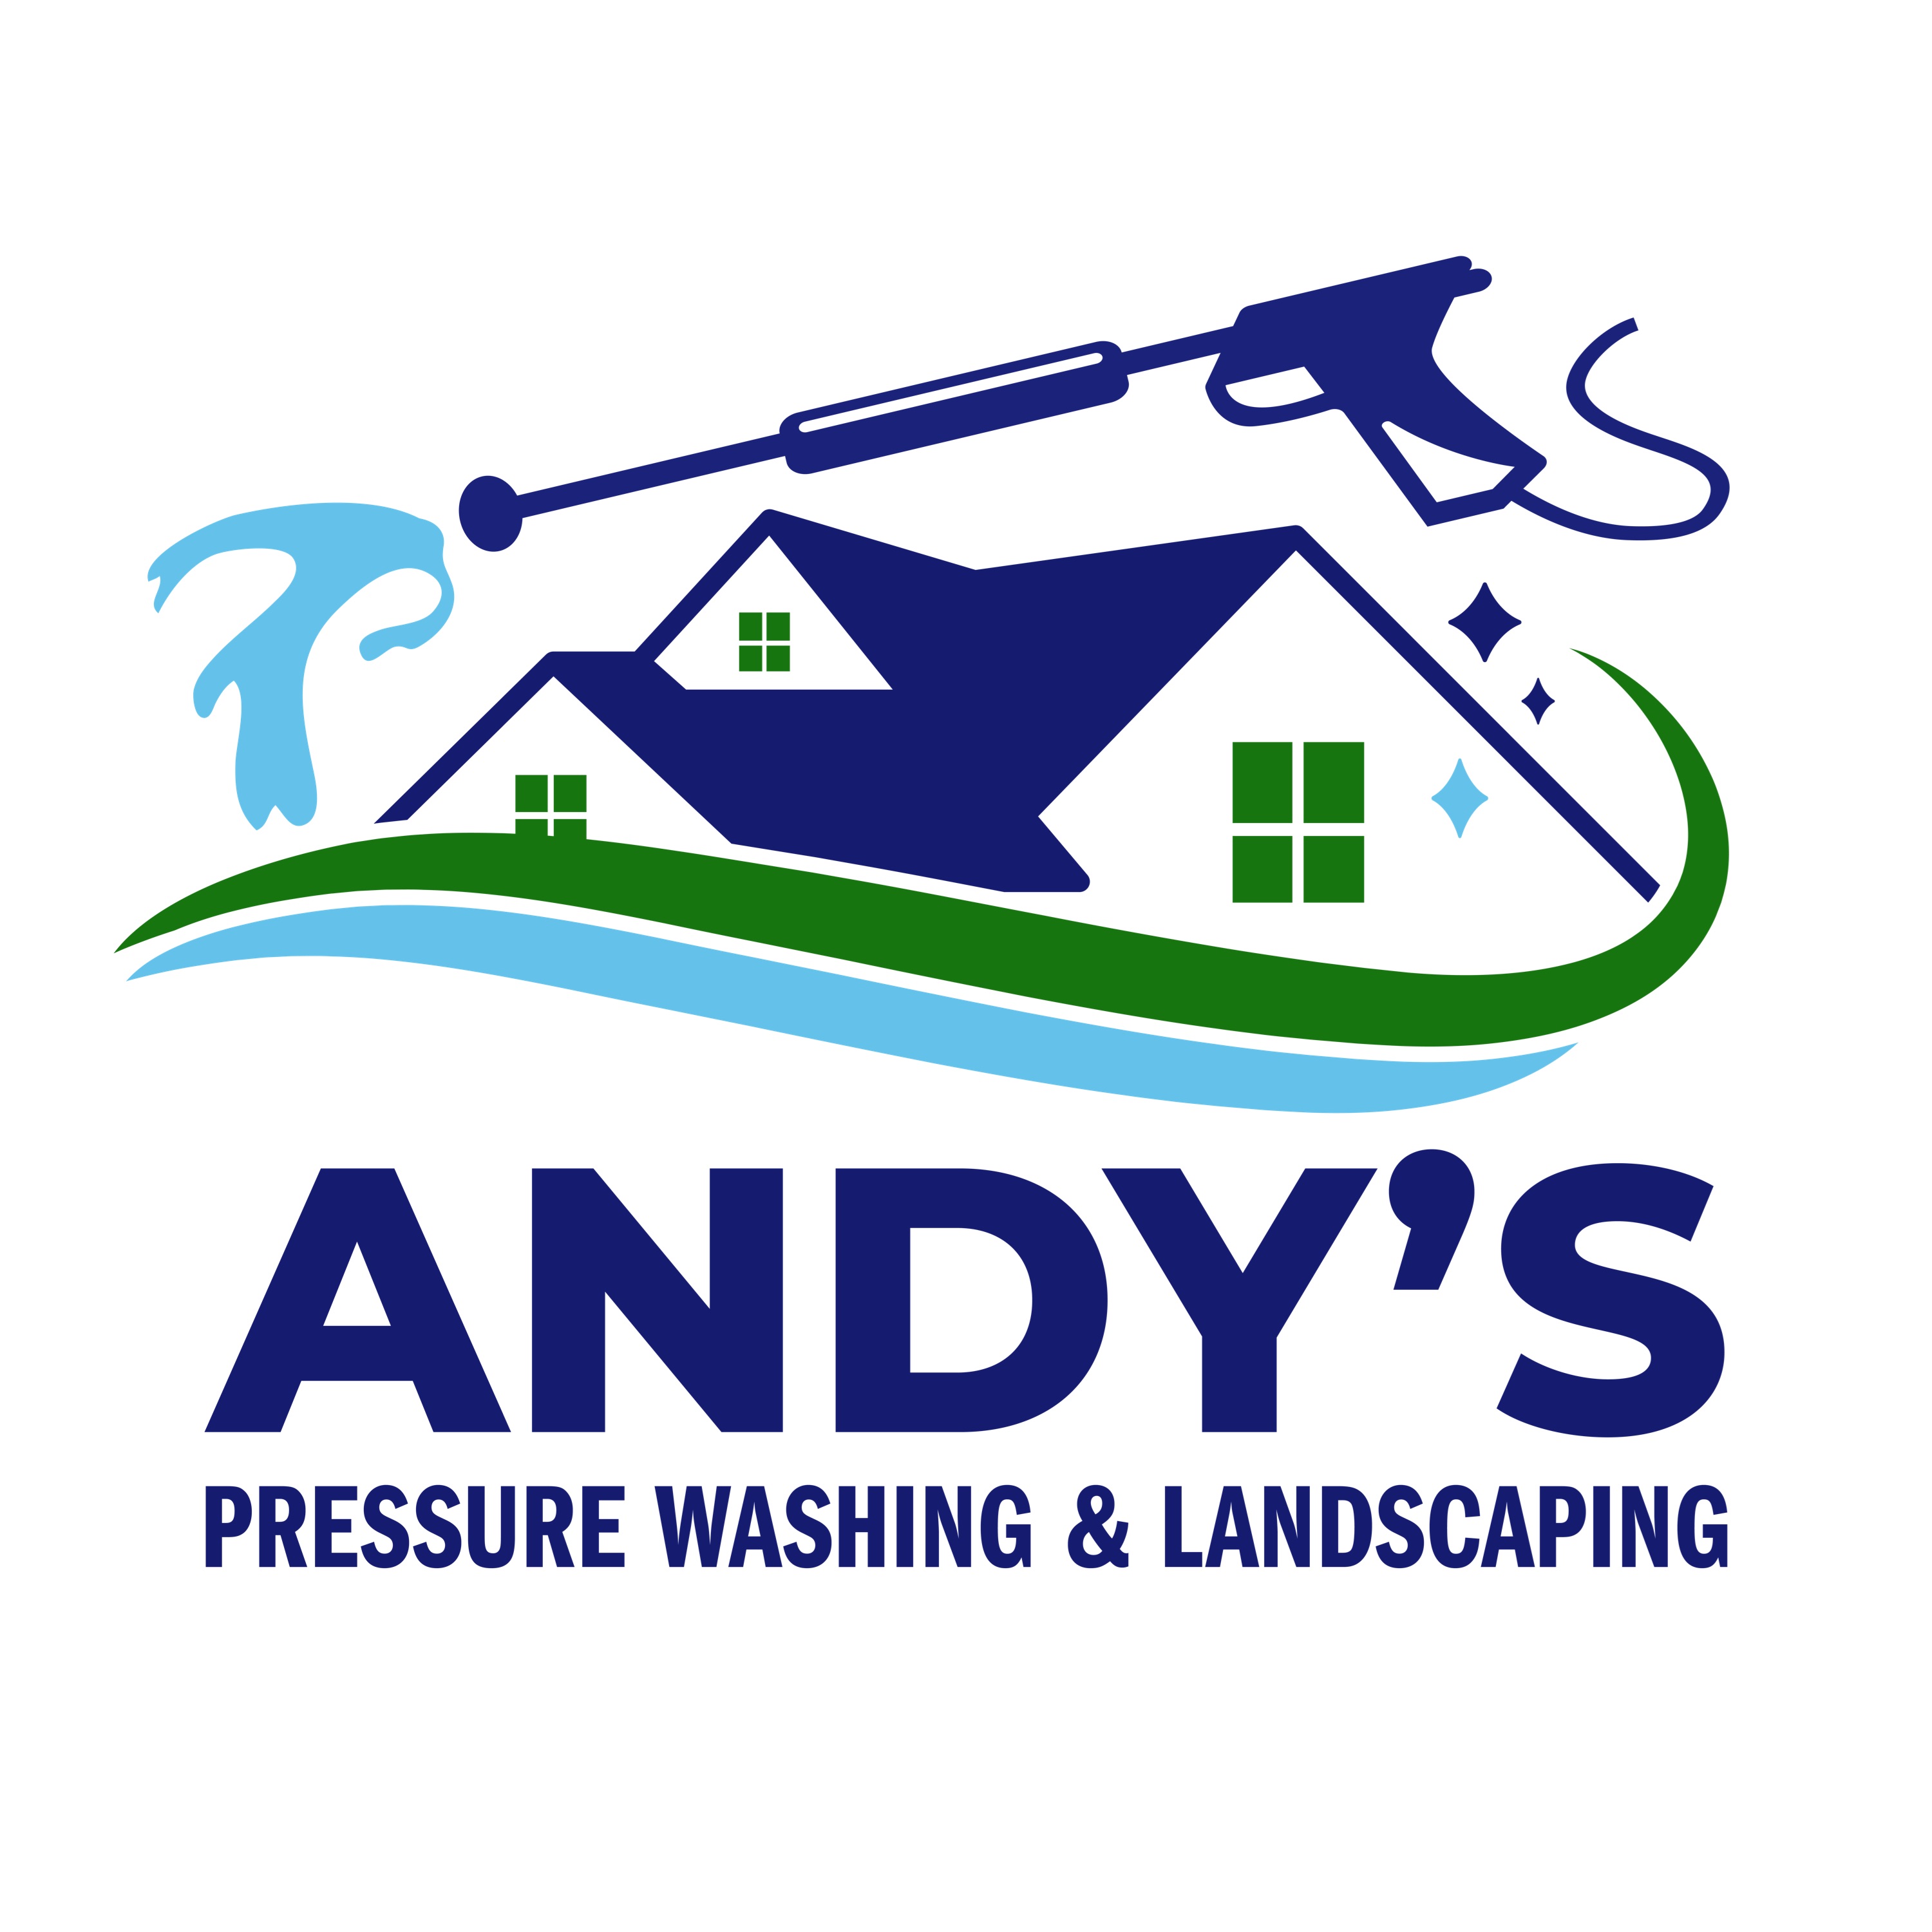 Andy's Pressure Washing & Landscaping Logo